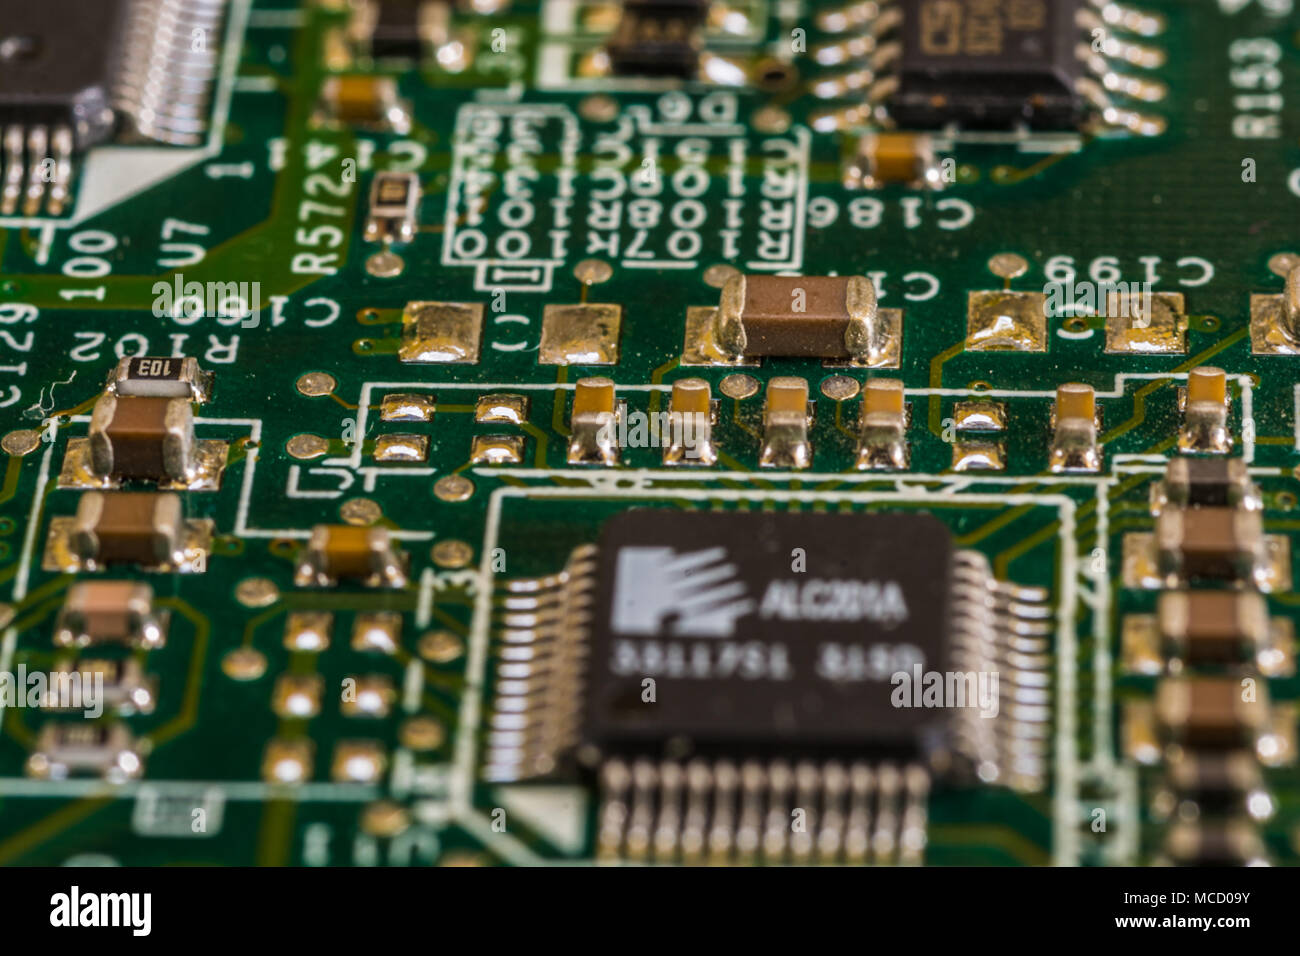 Close up view of computer motherboard showing details of different components Stock Photo